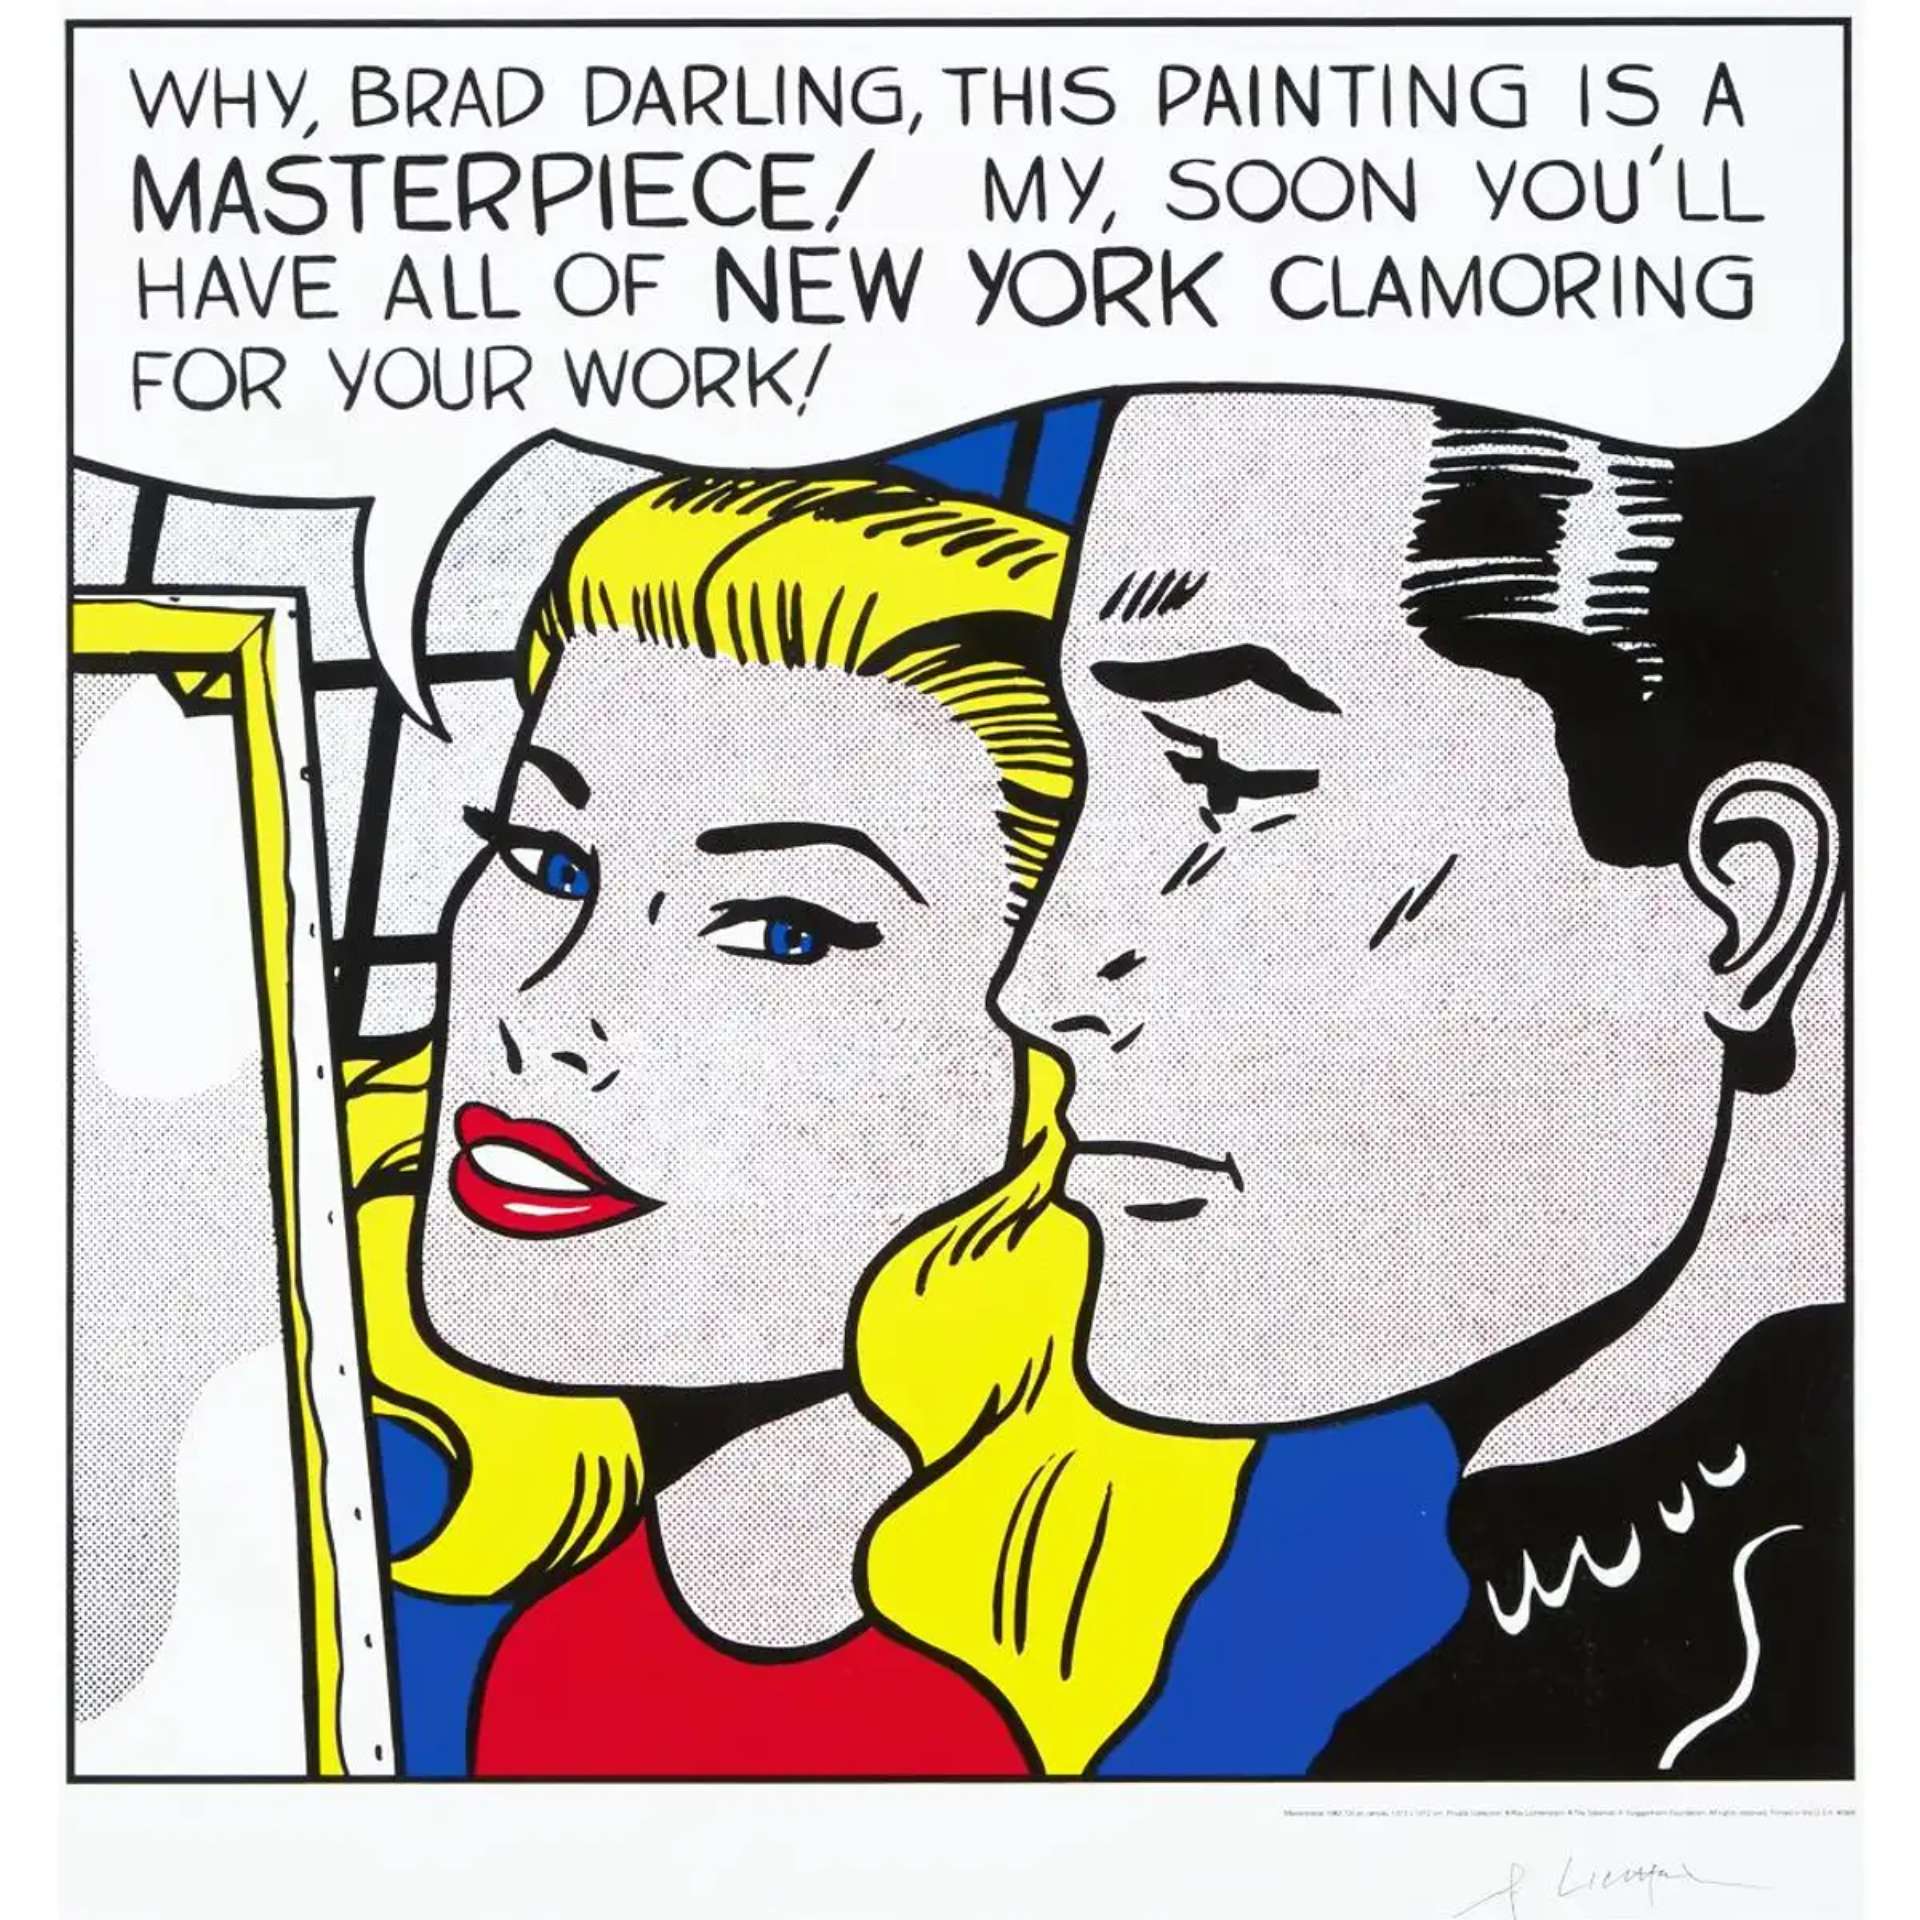 A screenprint by Roy Lichtenstein mimicking a comic book scene. A blonde woman looks to a man in a foreground, with a speech bubble reading: “WHY, BRAD DARLING, THIS PAINTING IS A MASTERPIECE! MY, SOON YOU'LL HAVE ALL OF NEW YORK CLAMORING FOR YOUR WORK!”